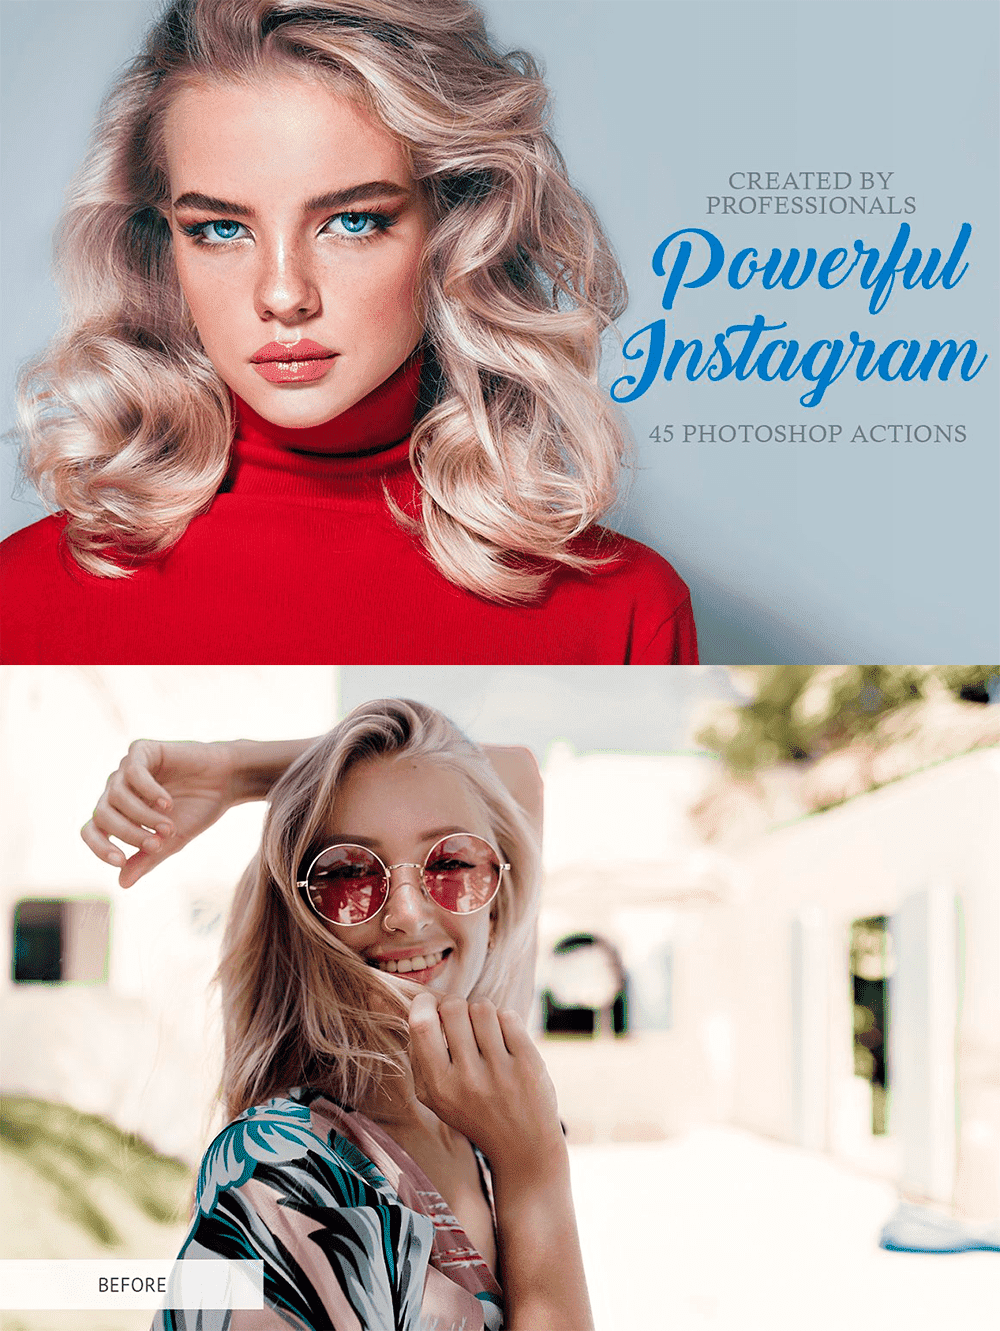 Powerful instagram photoshop actions, picture for pinterest 1000x1331.